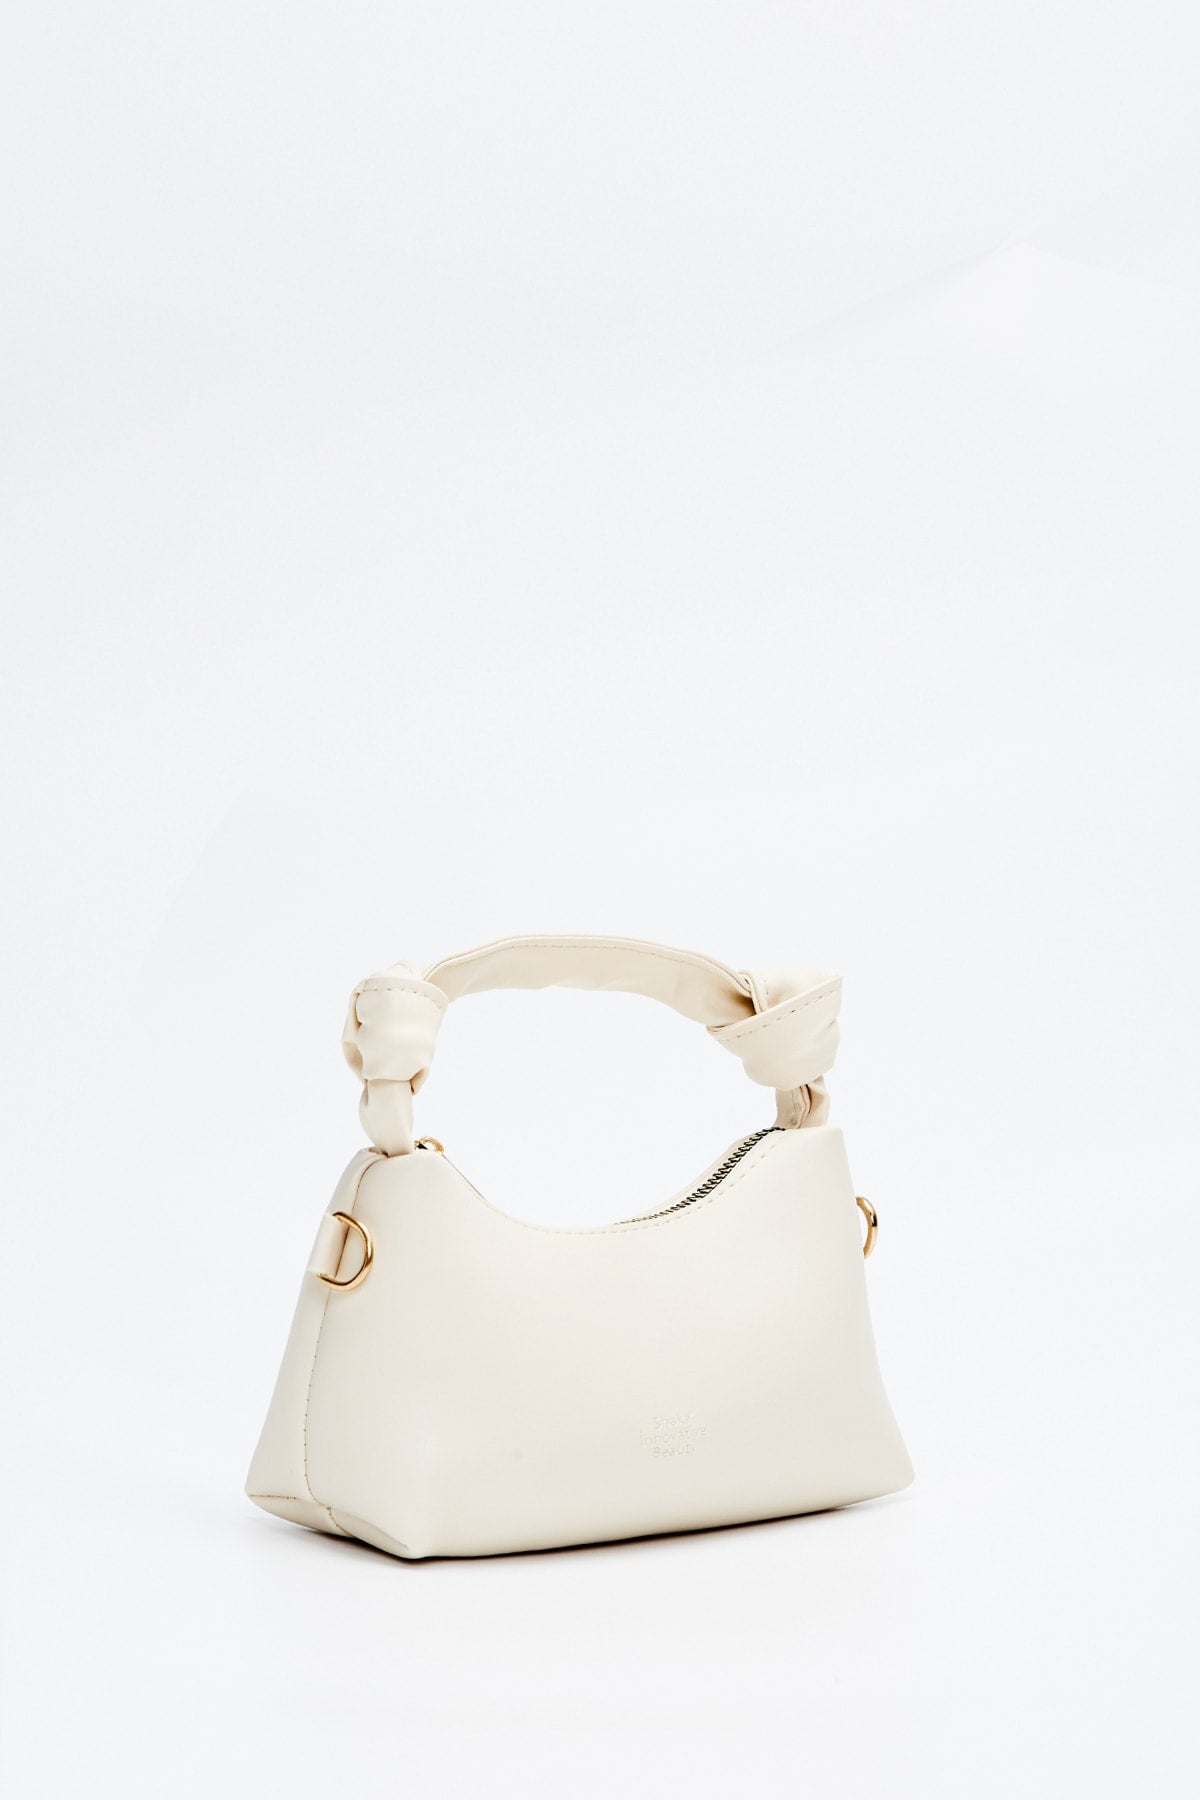 Cream Shk24 Soft Leather Knot Detailed Chain Strap Hand and Shoulder Bag L:14 E:22 W:8 cm